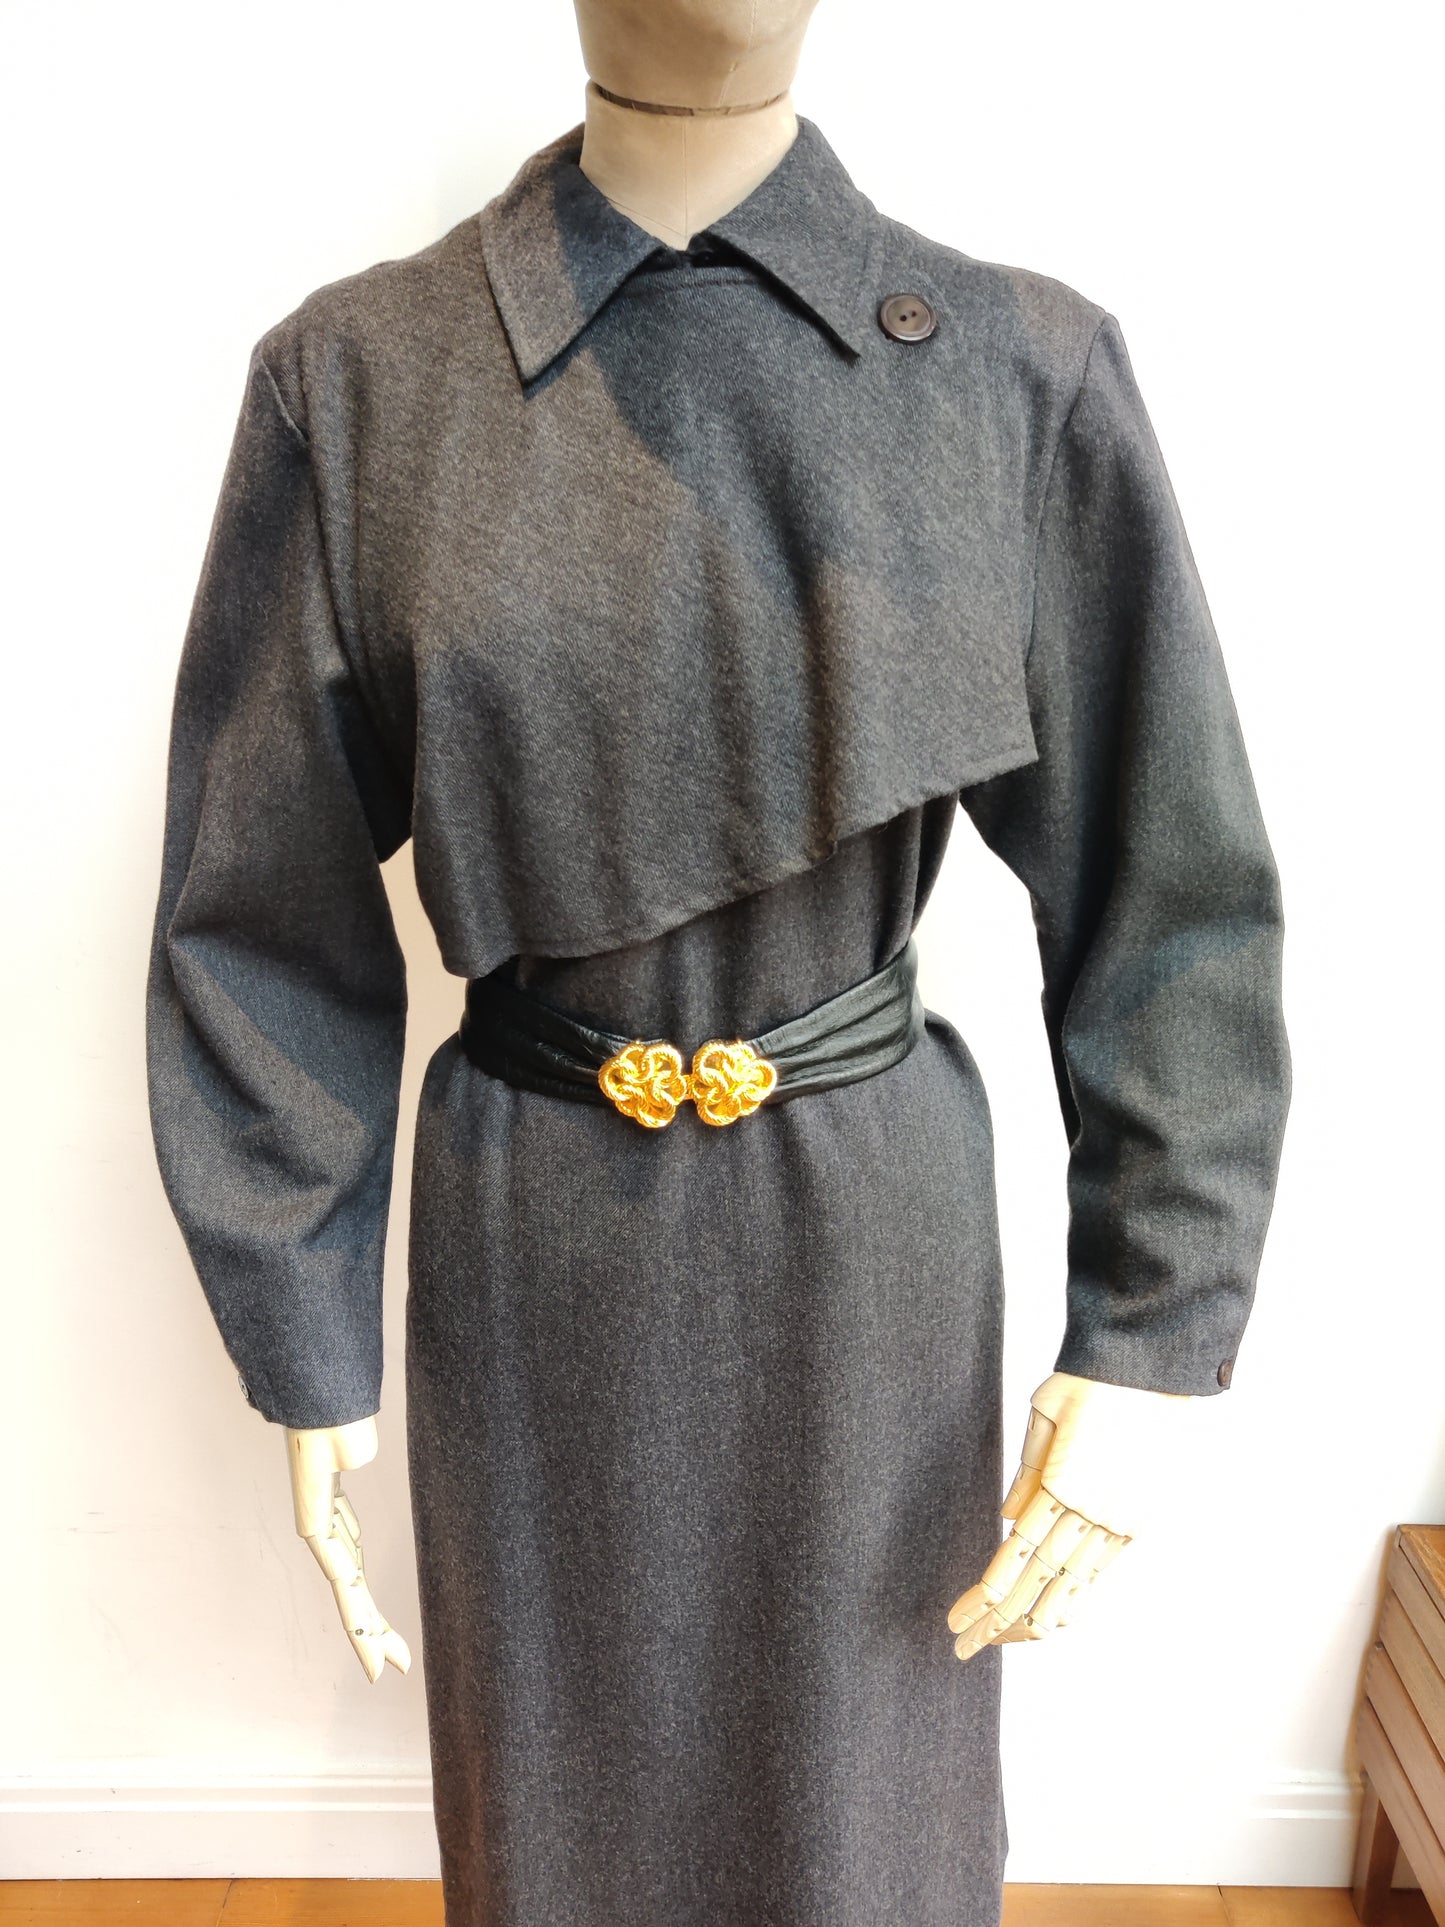 Grey 80s dress with collar and belt